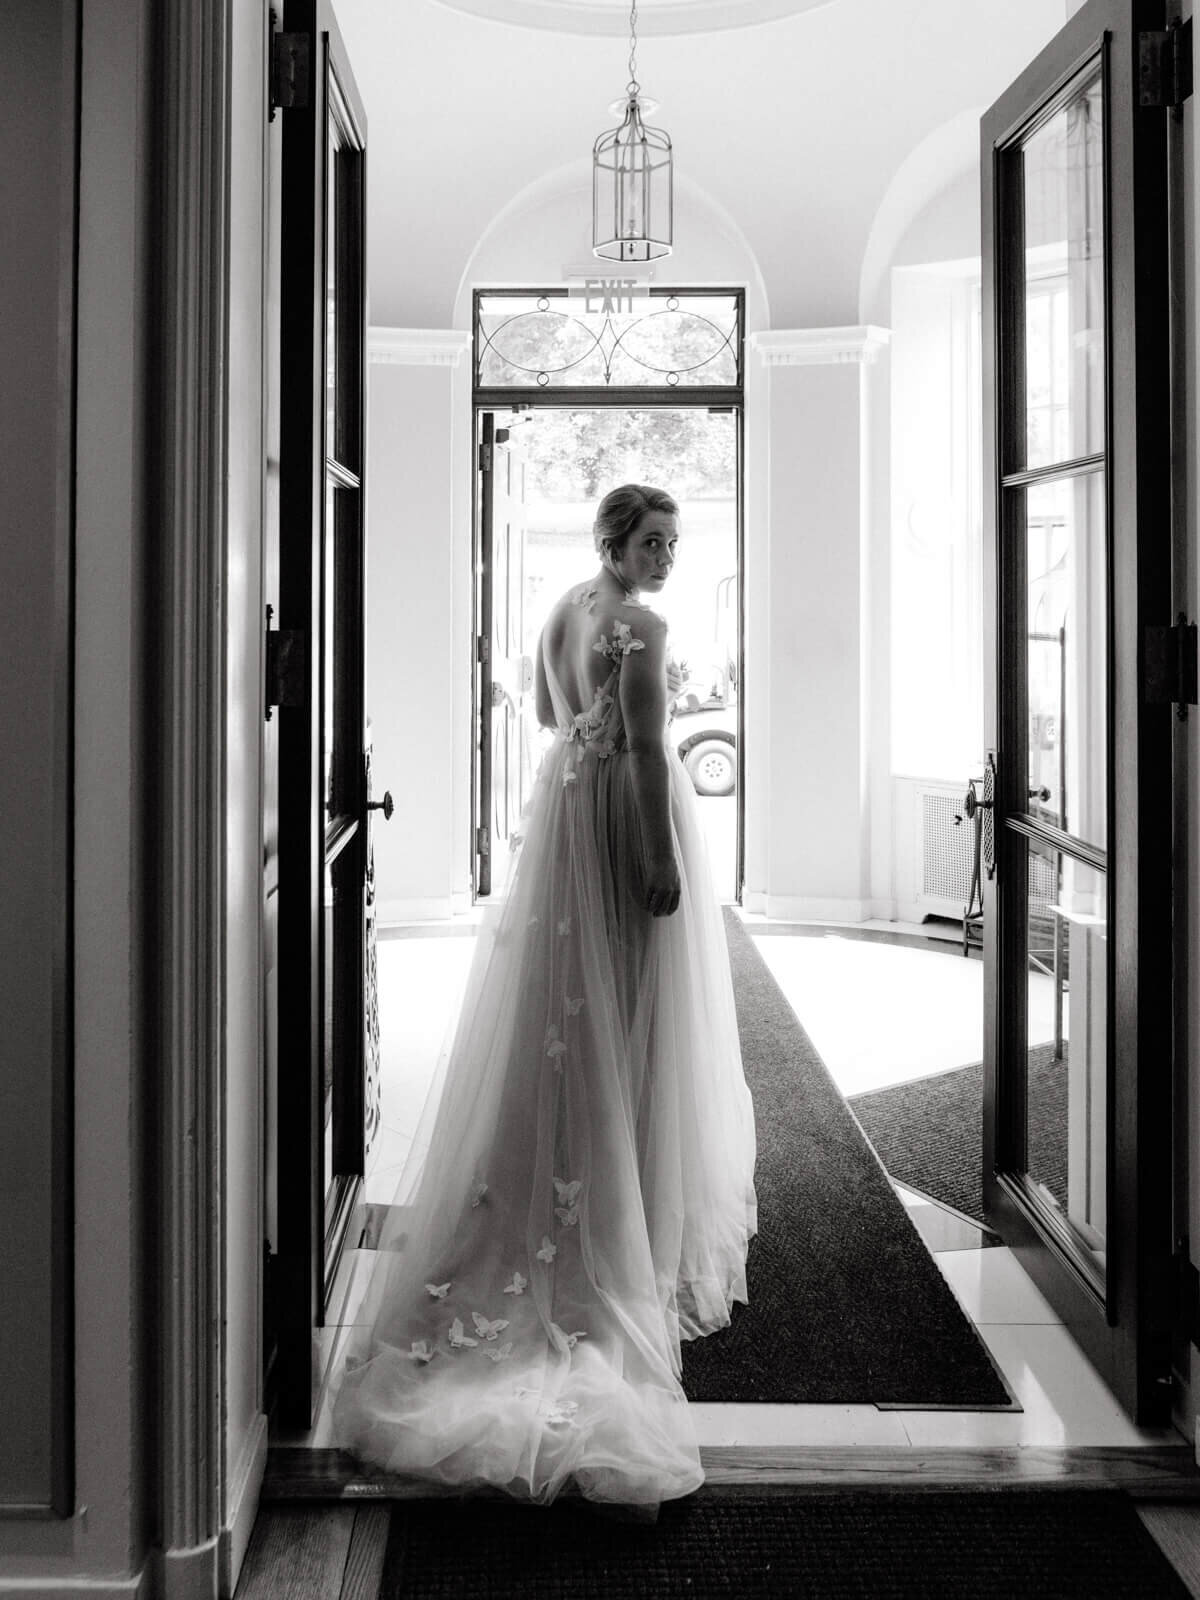 The bride, looking back,  is standing in the middle of large, glass doors.